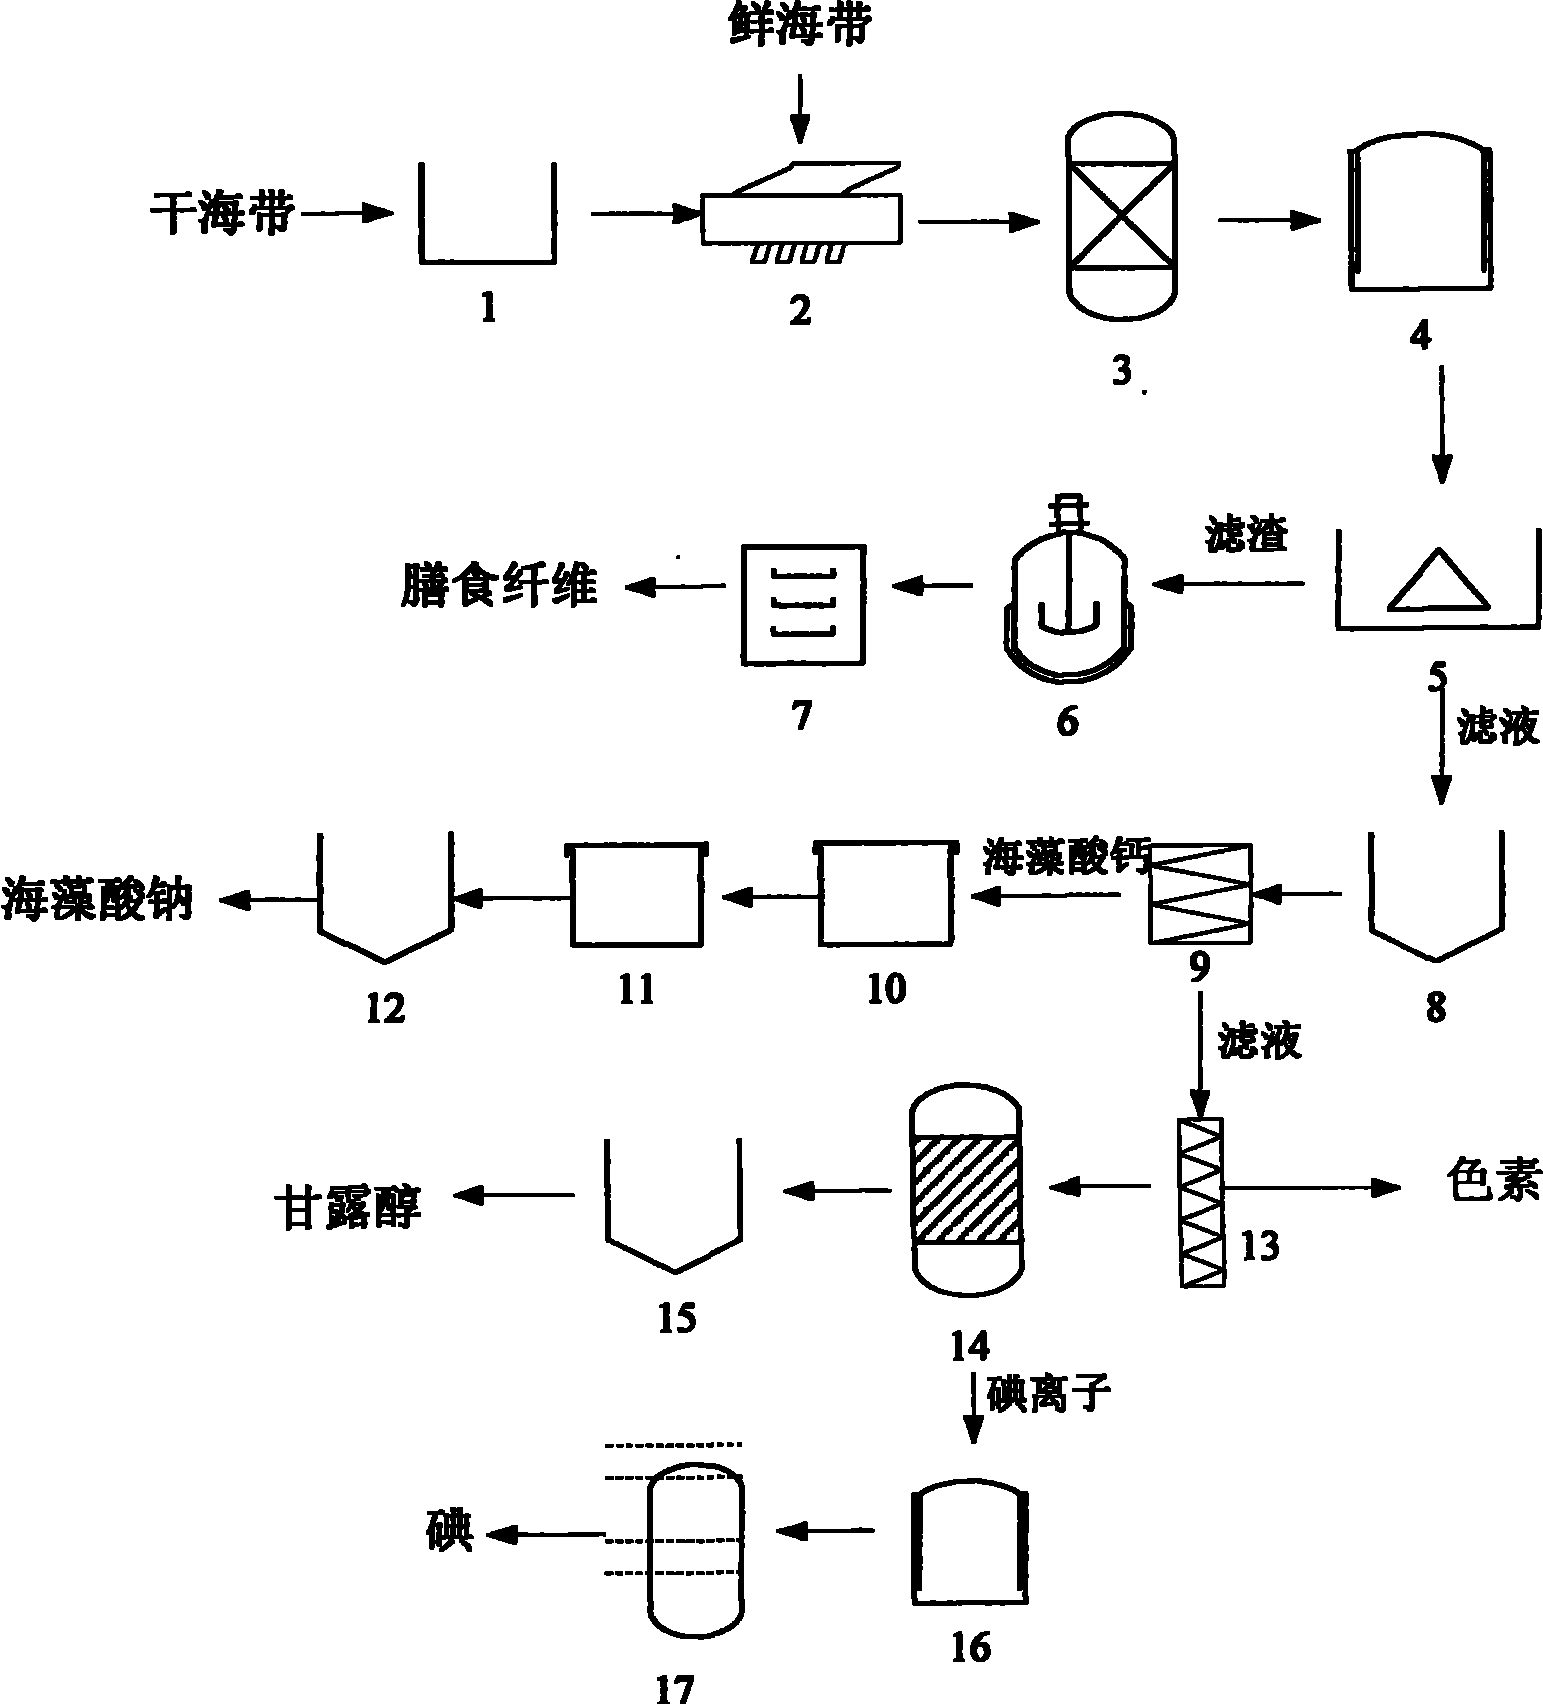 Method for preparing various products by separating kelp components and fully using biomass